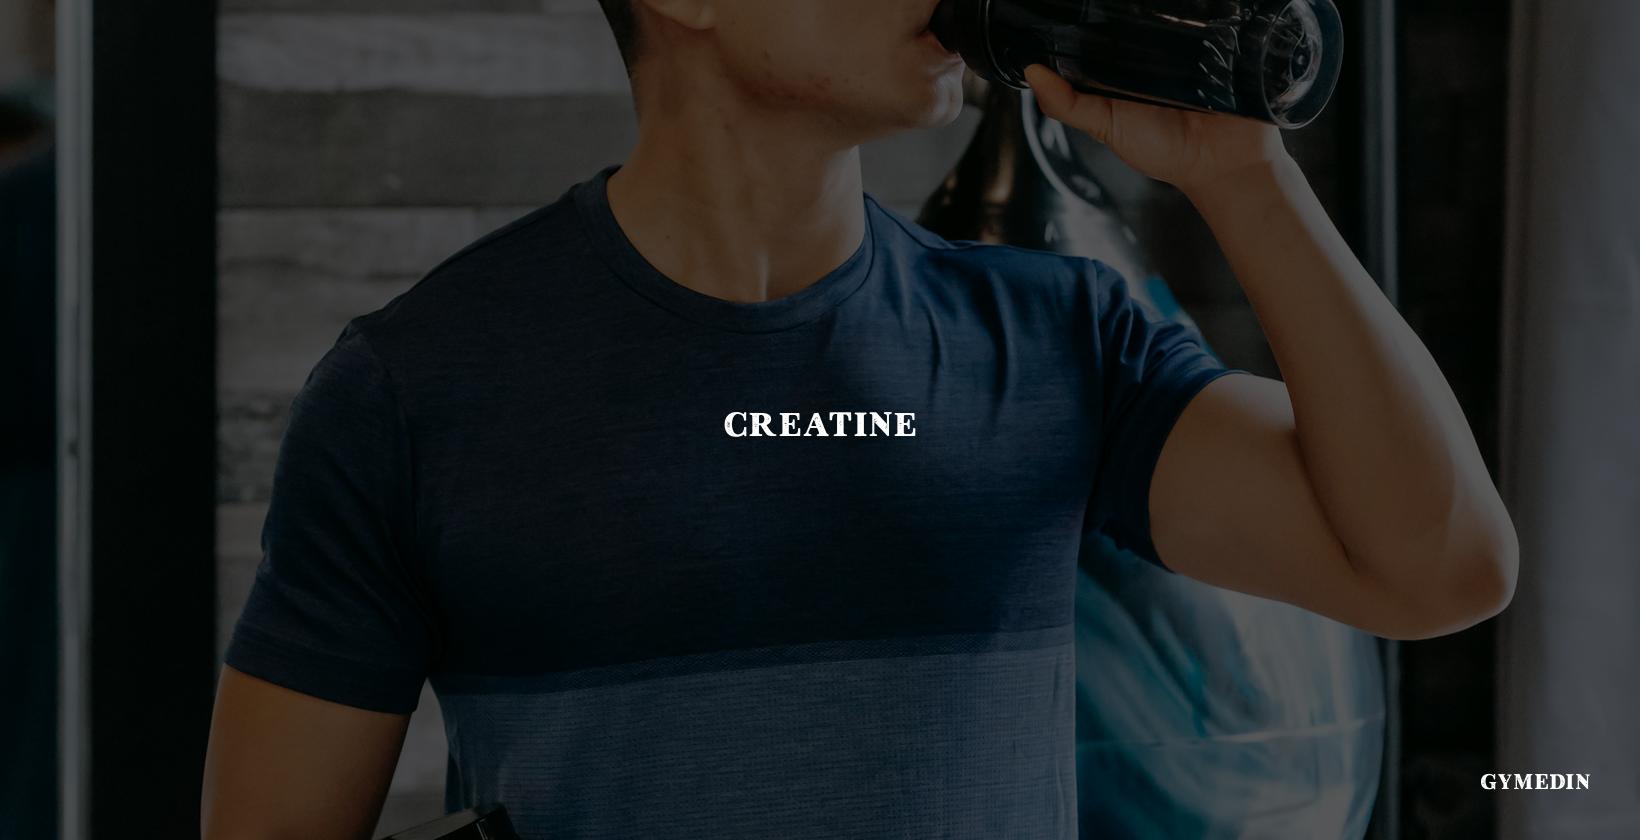 Creatine: A Key Supplement for Muscle Gain